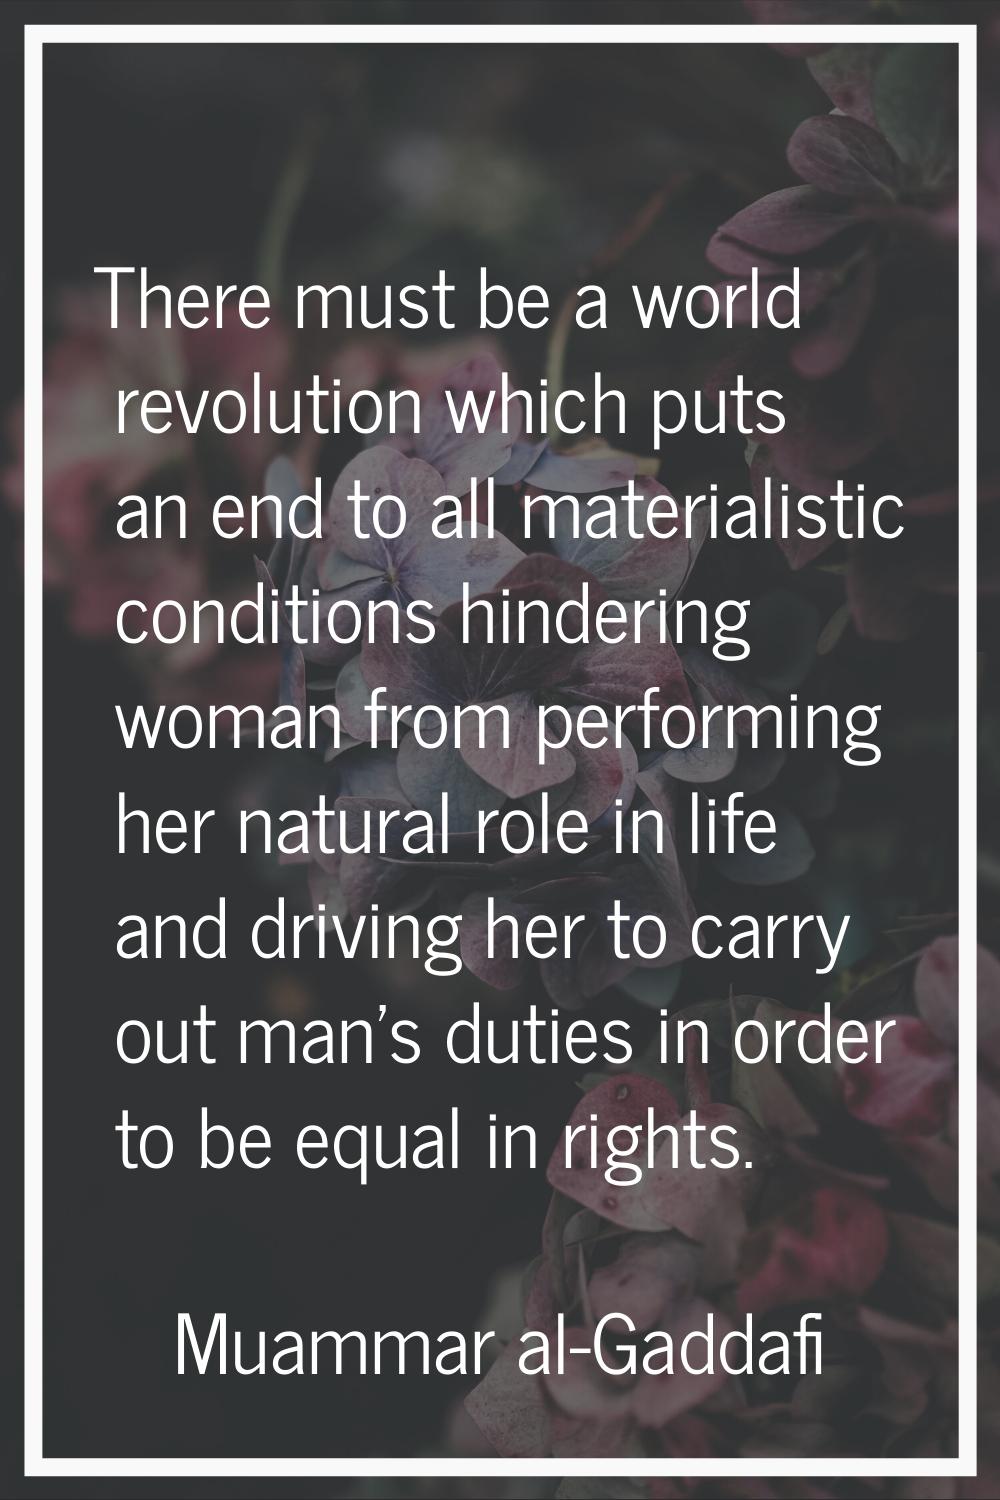 There must be a world revolution which puts an end to all materialistic conditions hindering woman 